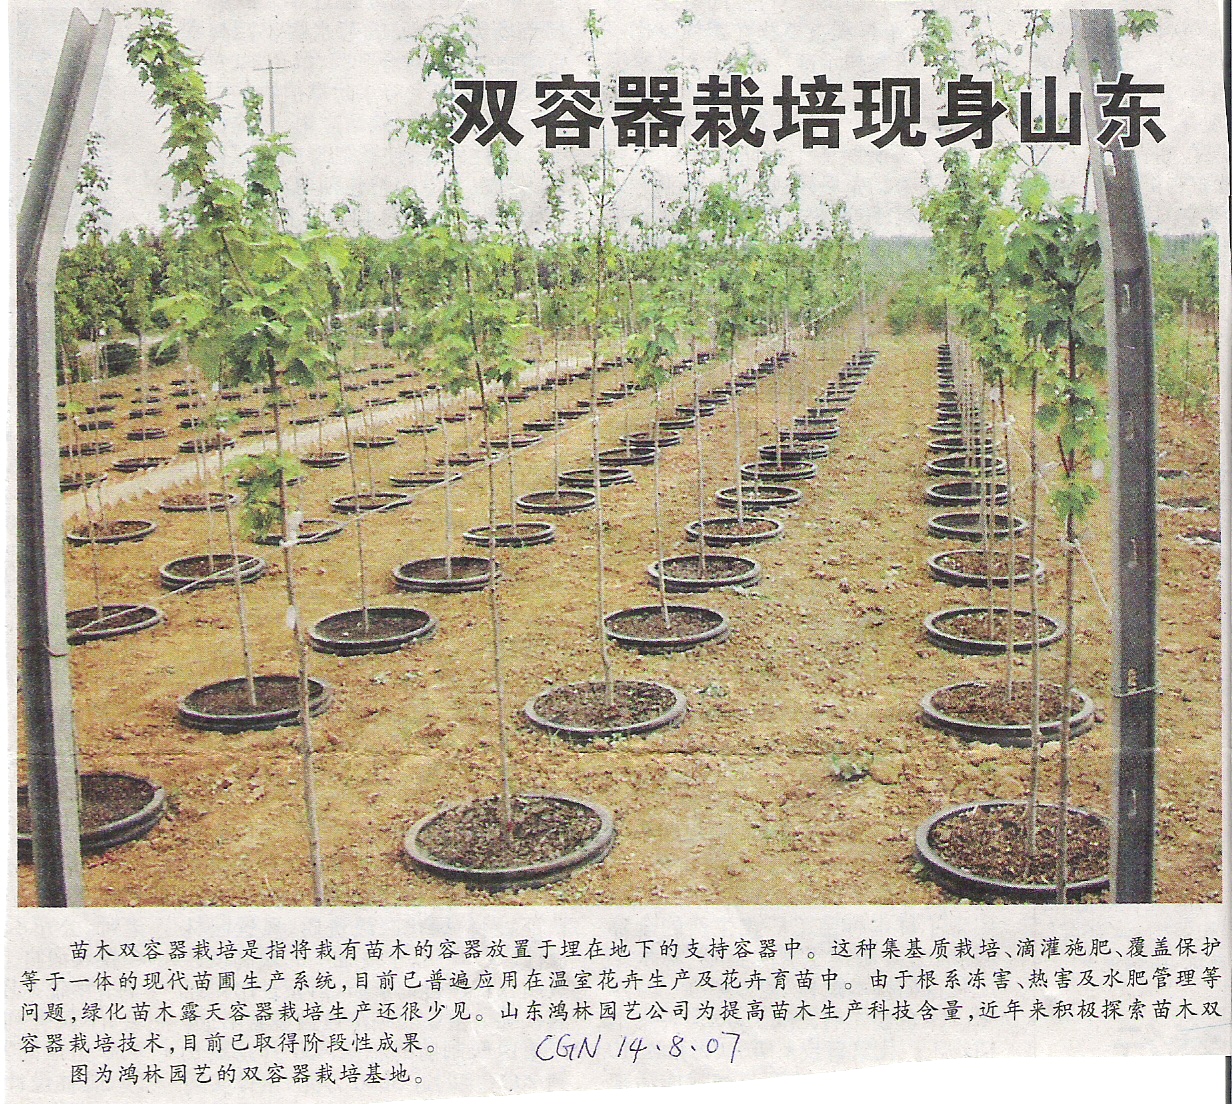 [China+Tree+News+---+How+to+produce+trees+with+Girdling+Roots.jpg]